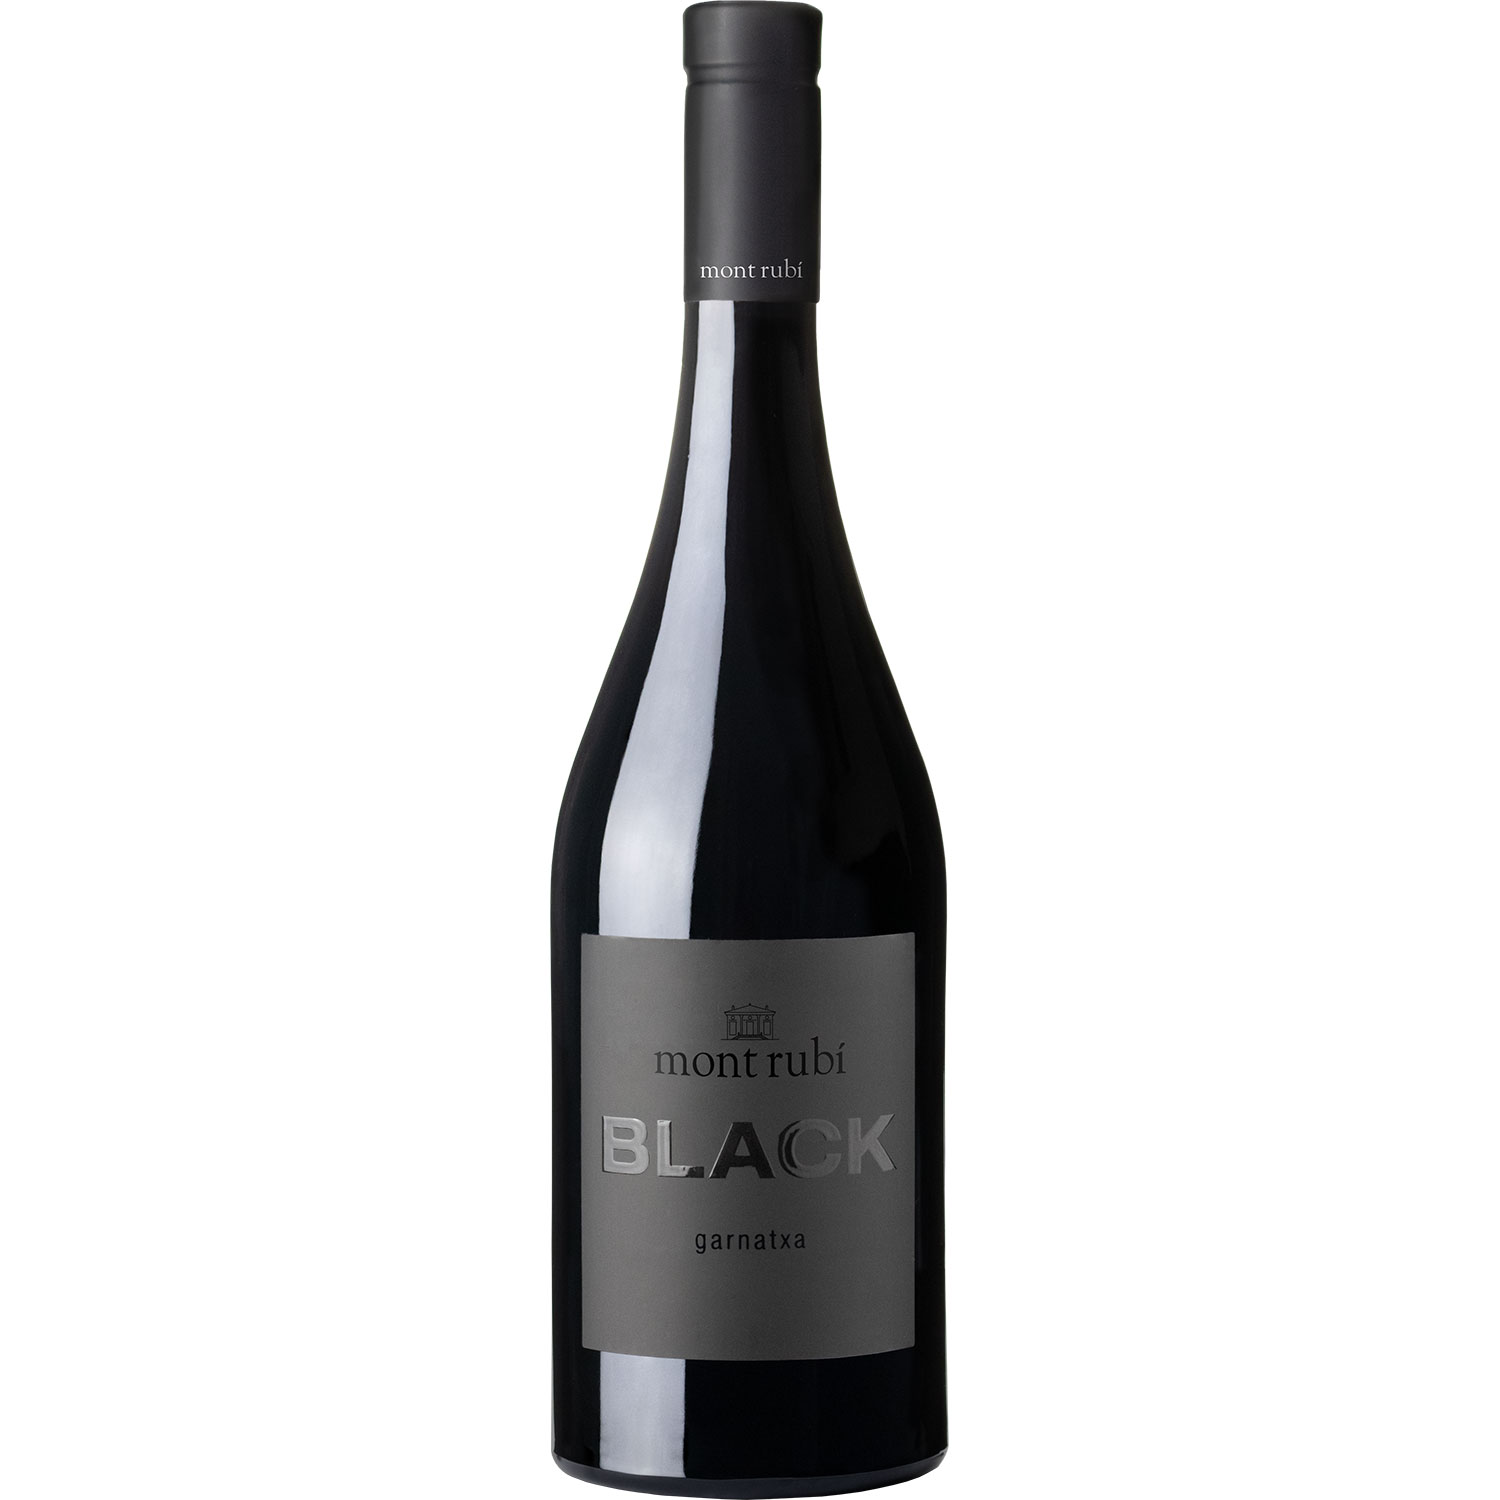 Bottle of HMR Heretat Mont Rubi Black from search results